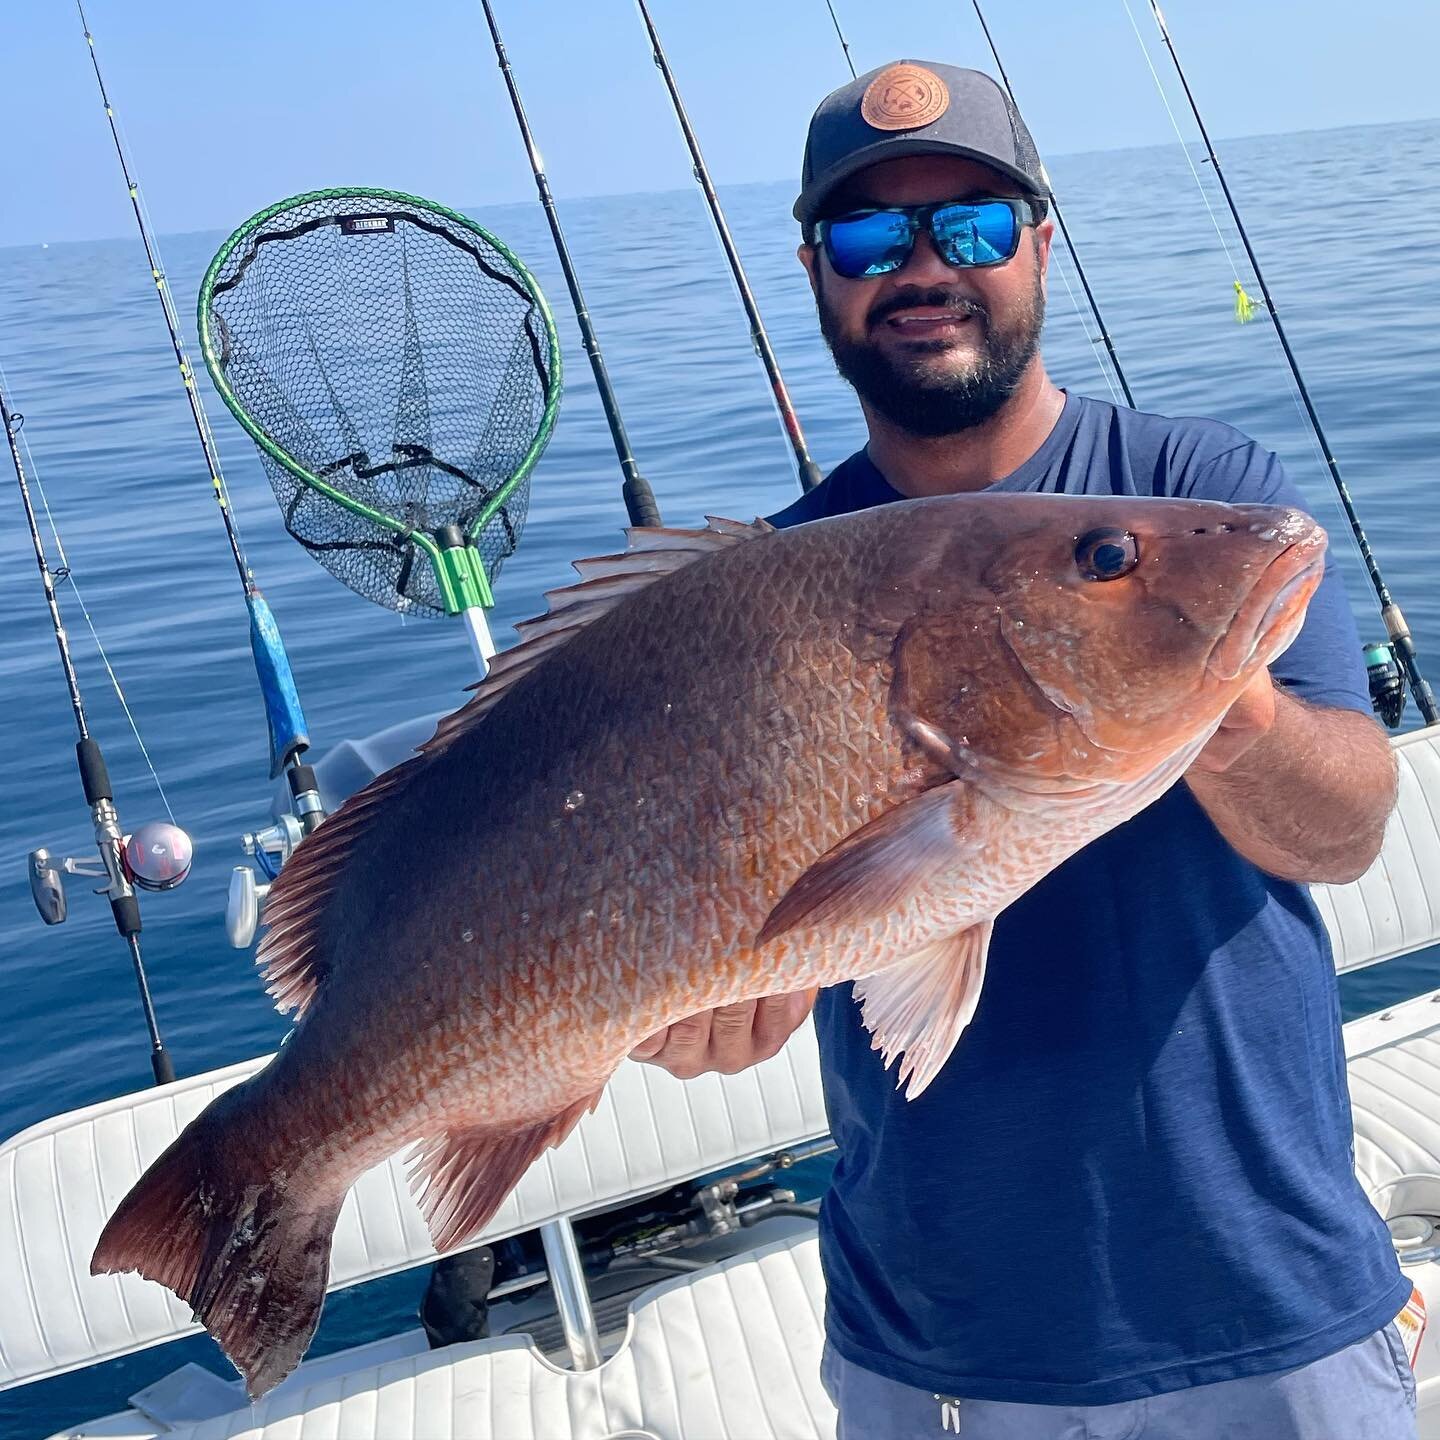 Monster 30&rdquo; Mangrove snapper we caught today.  It&rsquo;s leading the boat house summer slam tournament weighing in at 12lb a gutted.